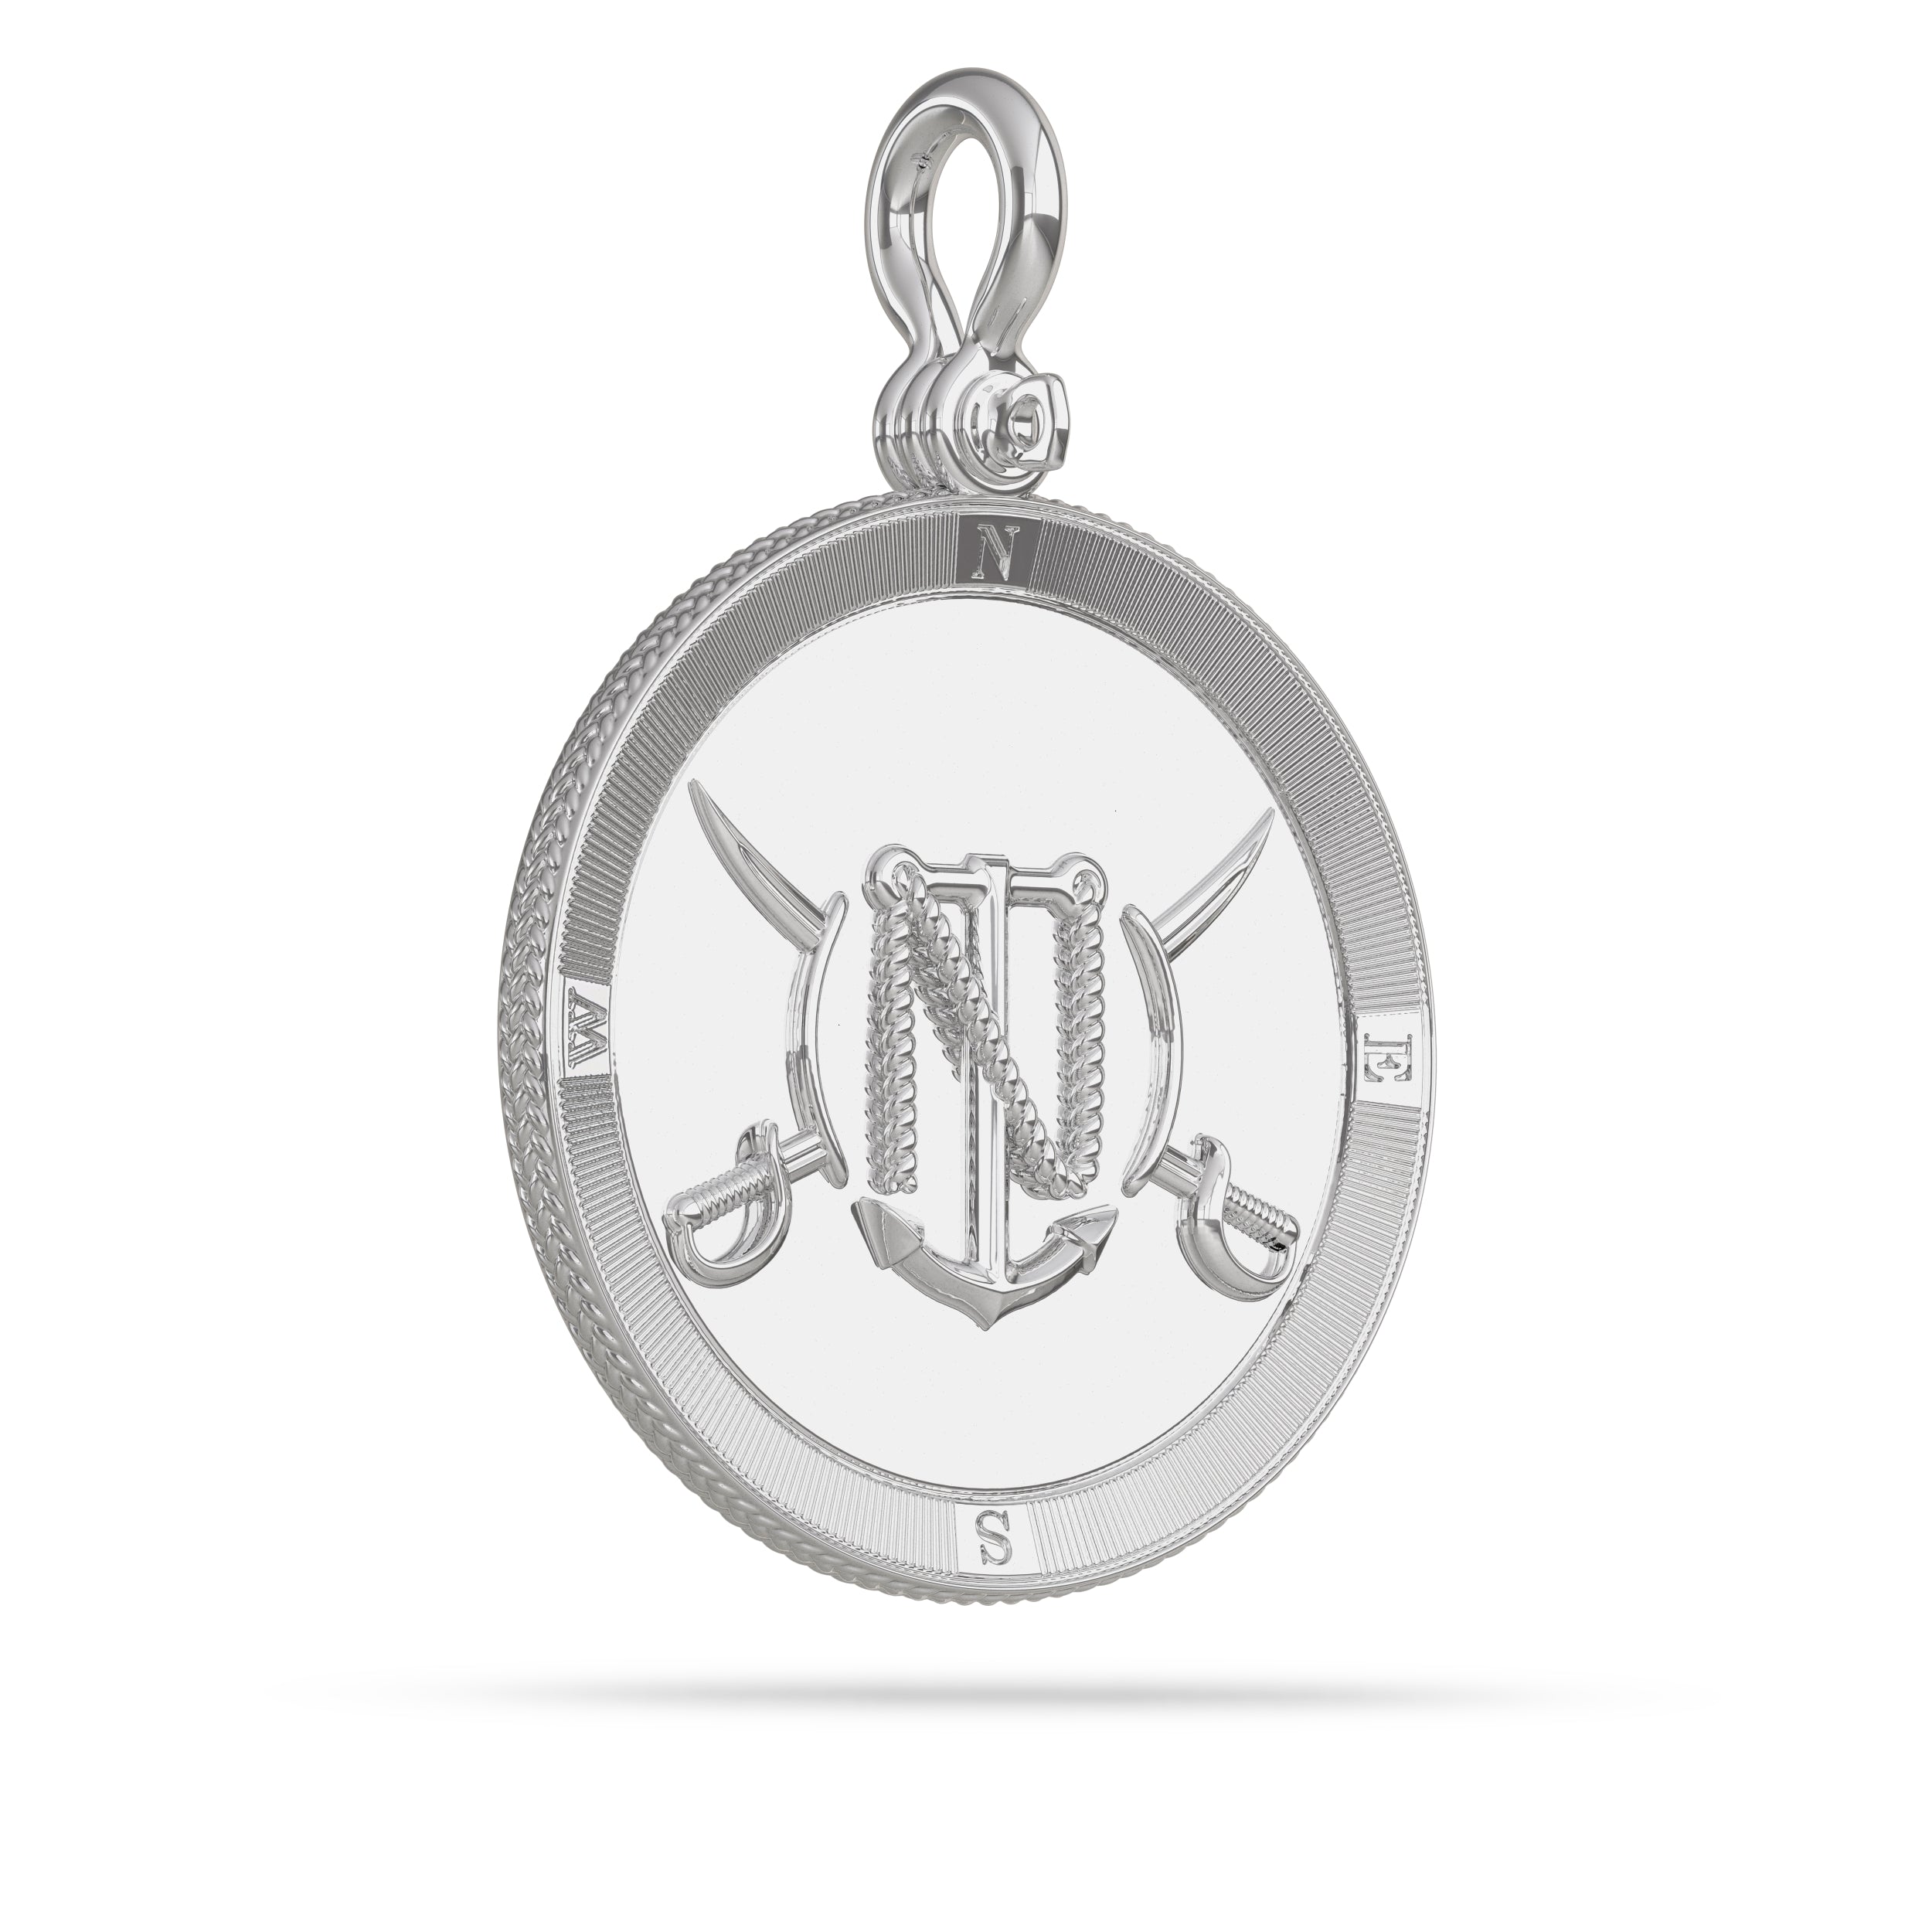 Compass Medallion Pendant Large in white gold  with Shackle by Nautical Treasure